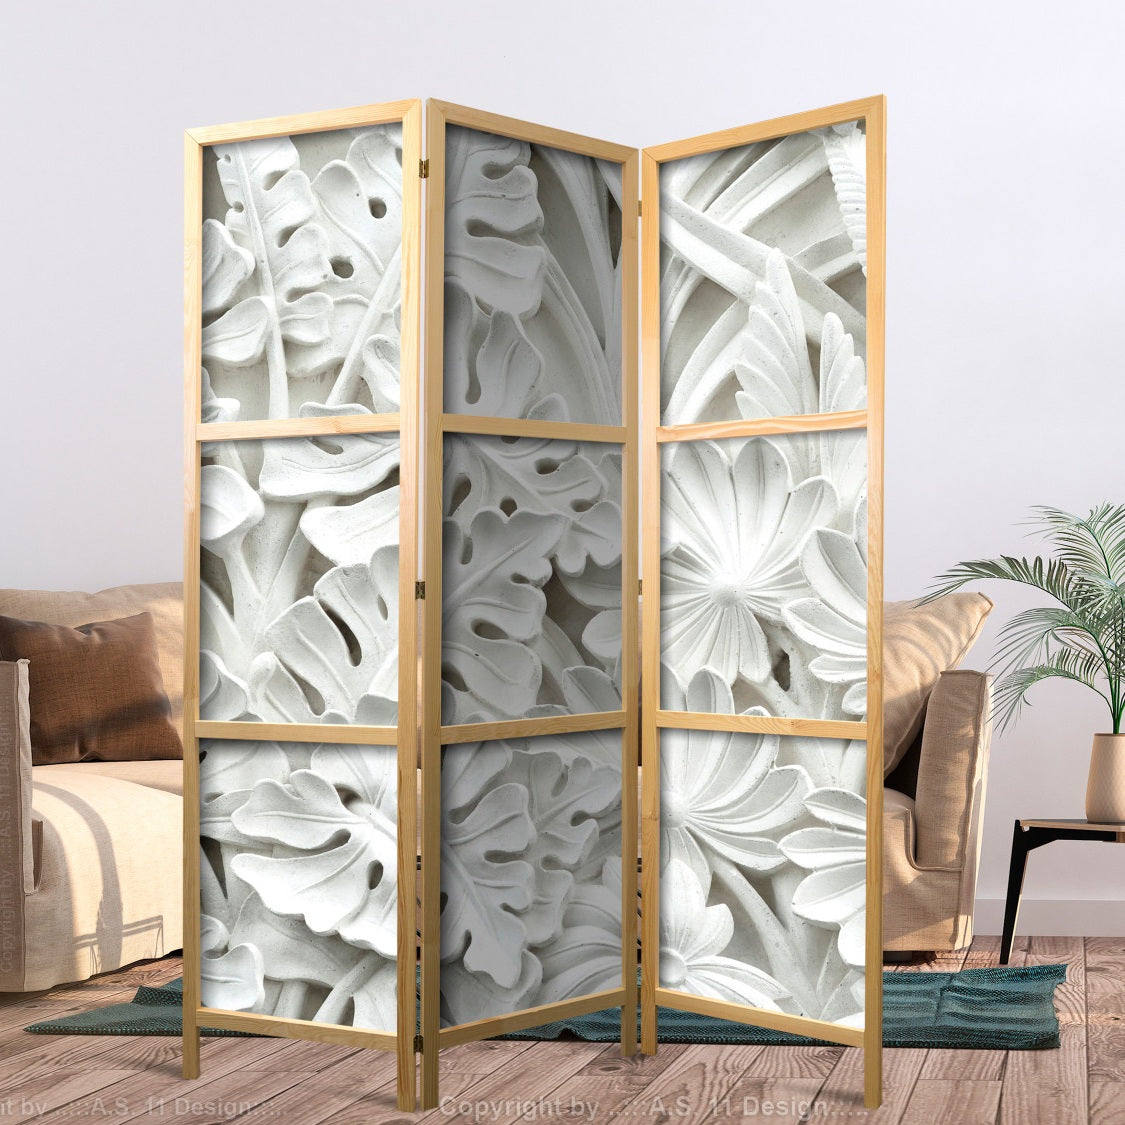 a shoji folding screen in a living room, you can see white patterned design of flowers printed on the canvas of the screen